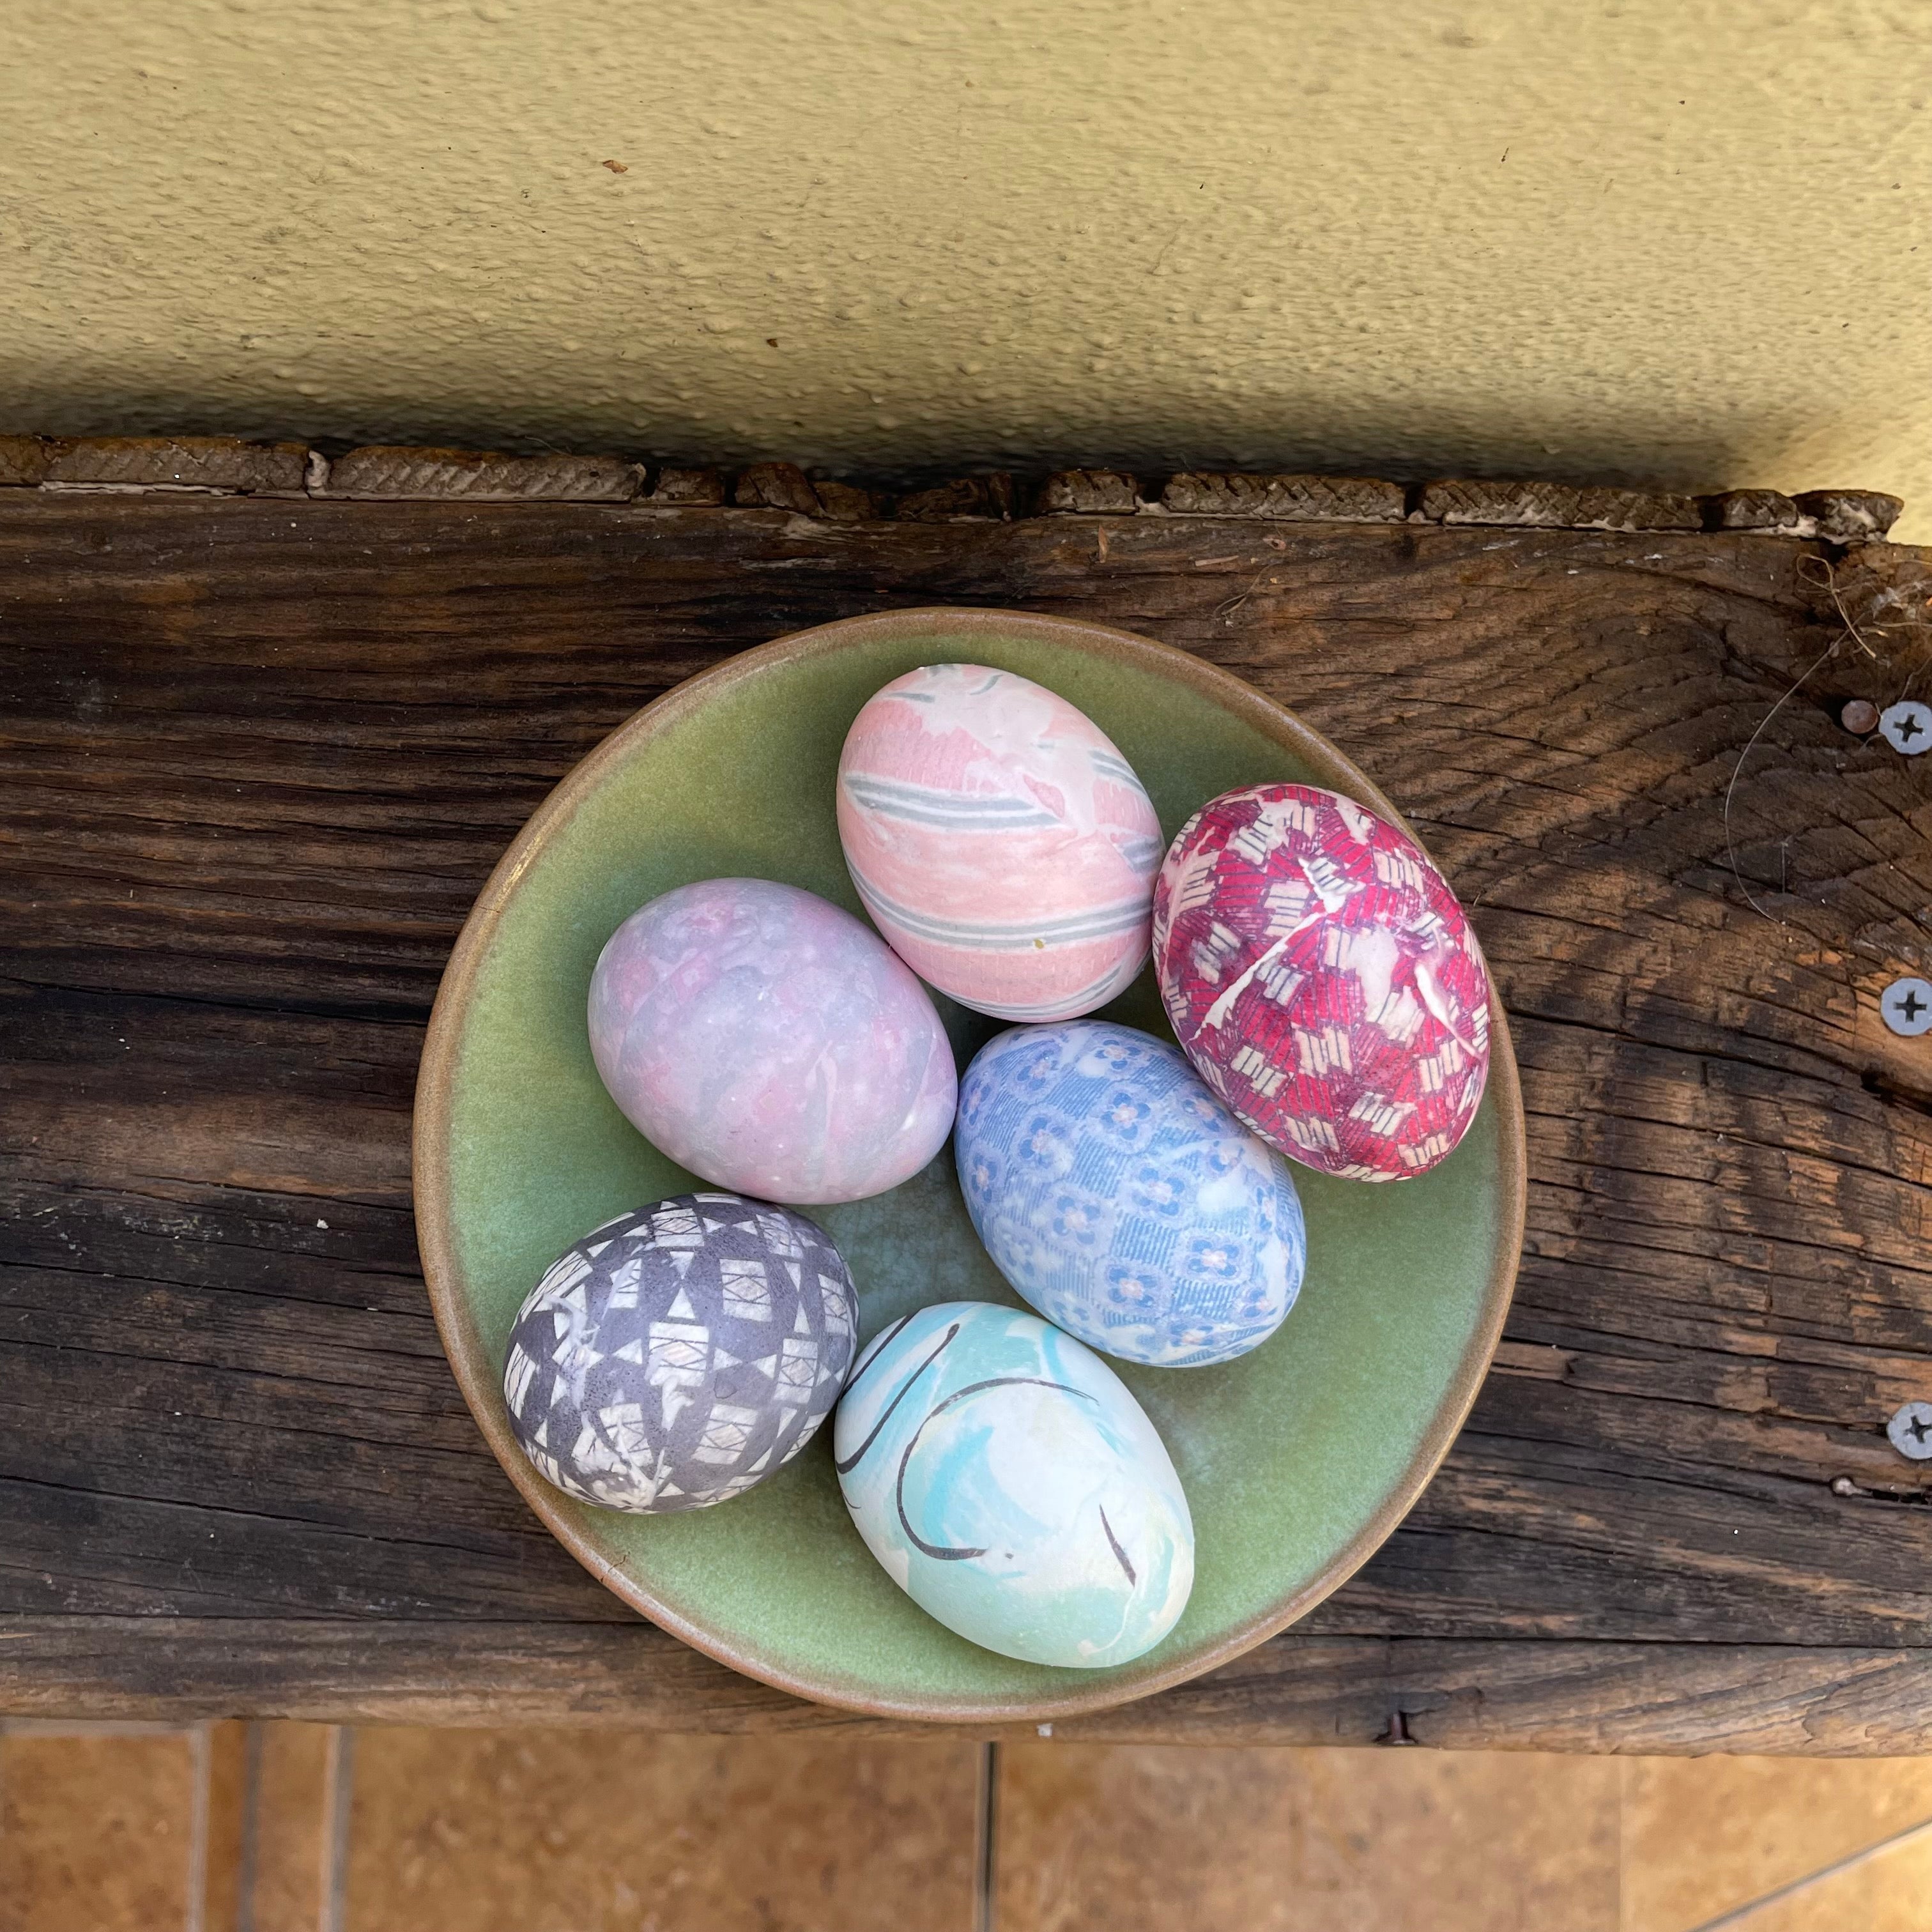 How to dye eggs with old silk ties